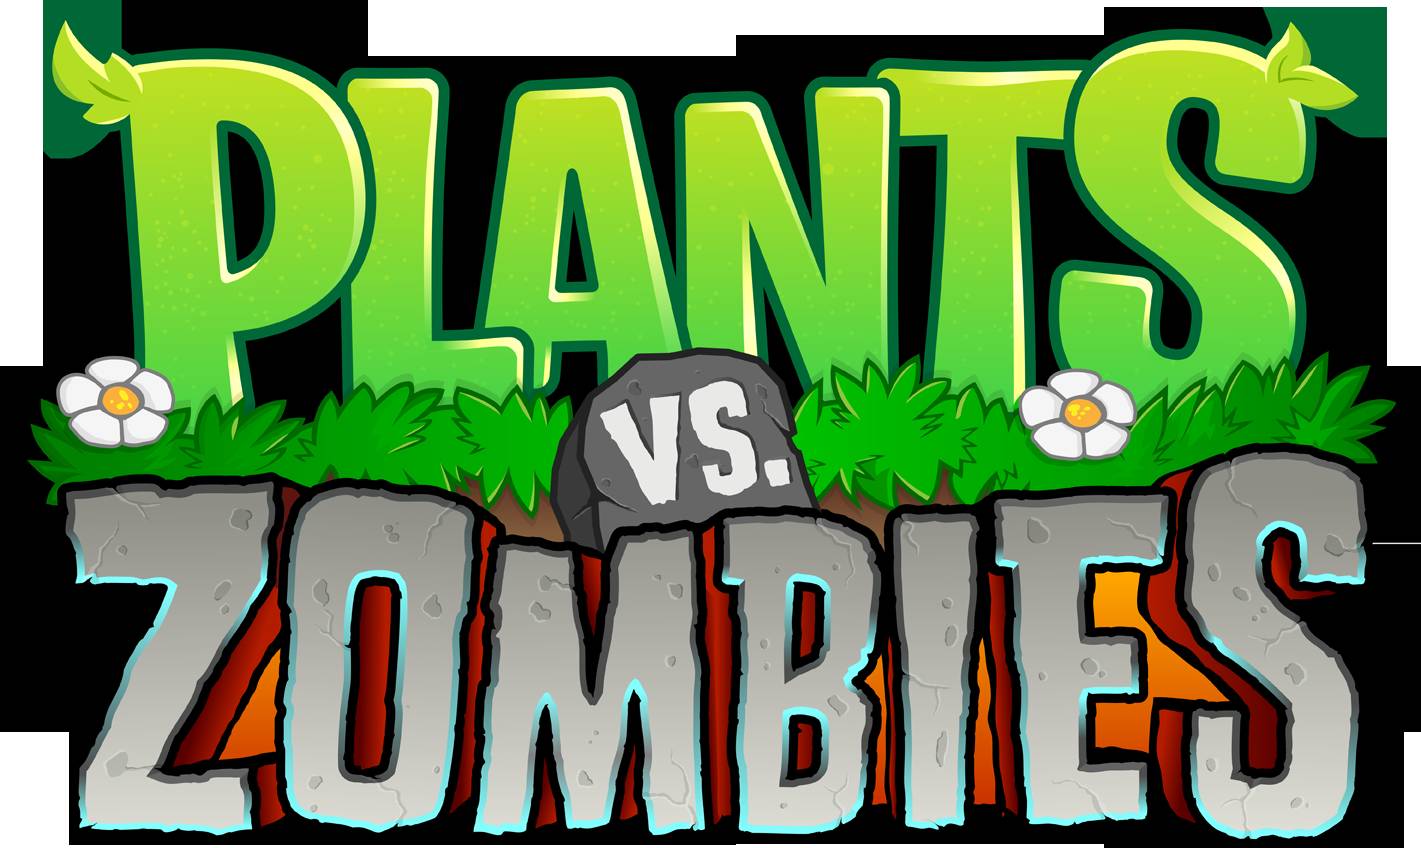 A new Plants vs Zombies game has been leaked